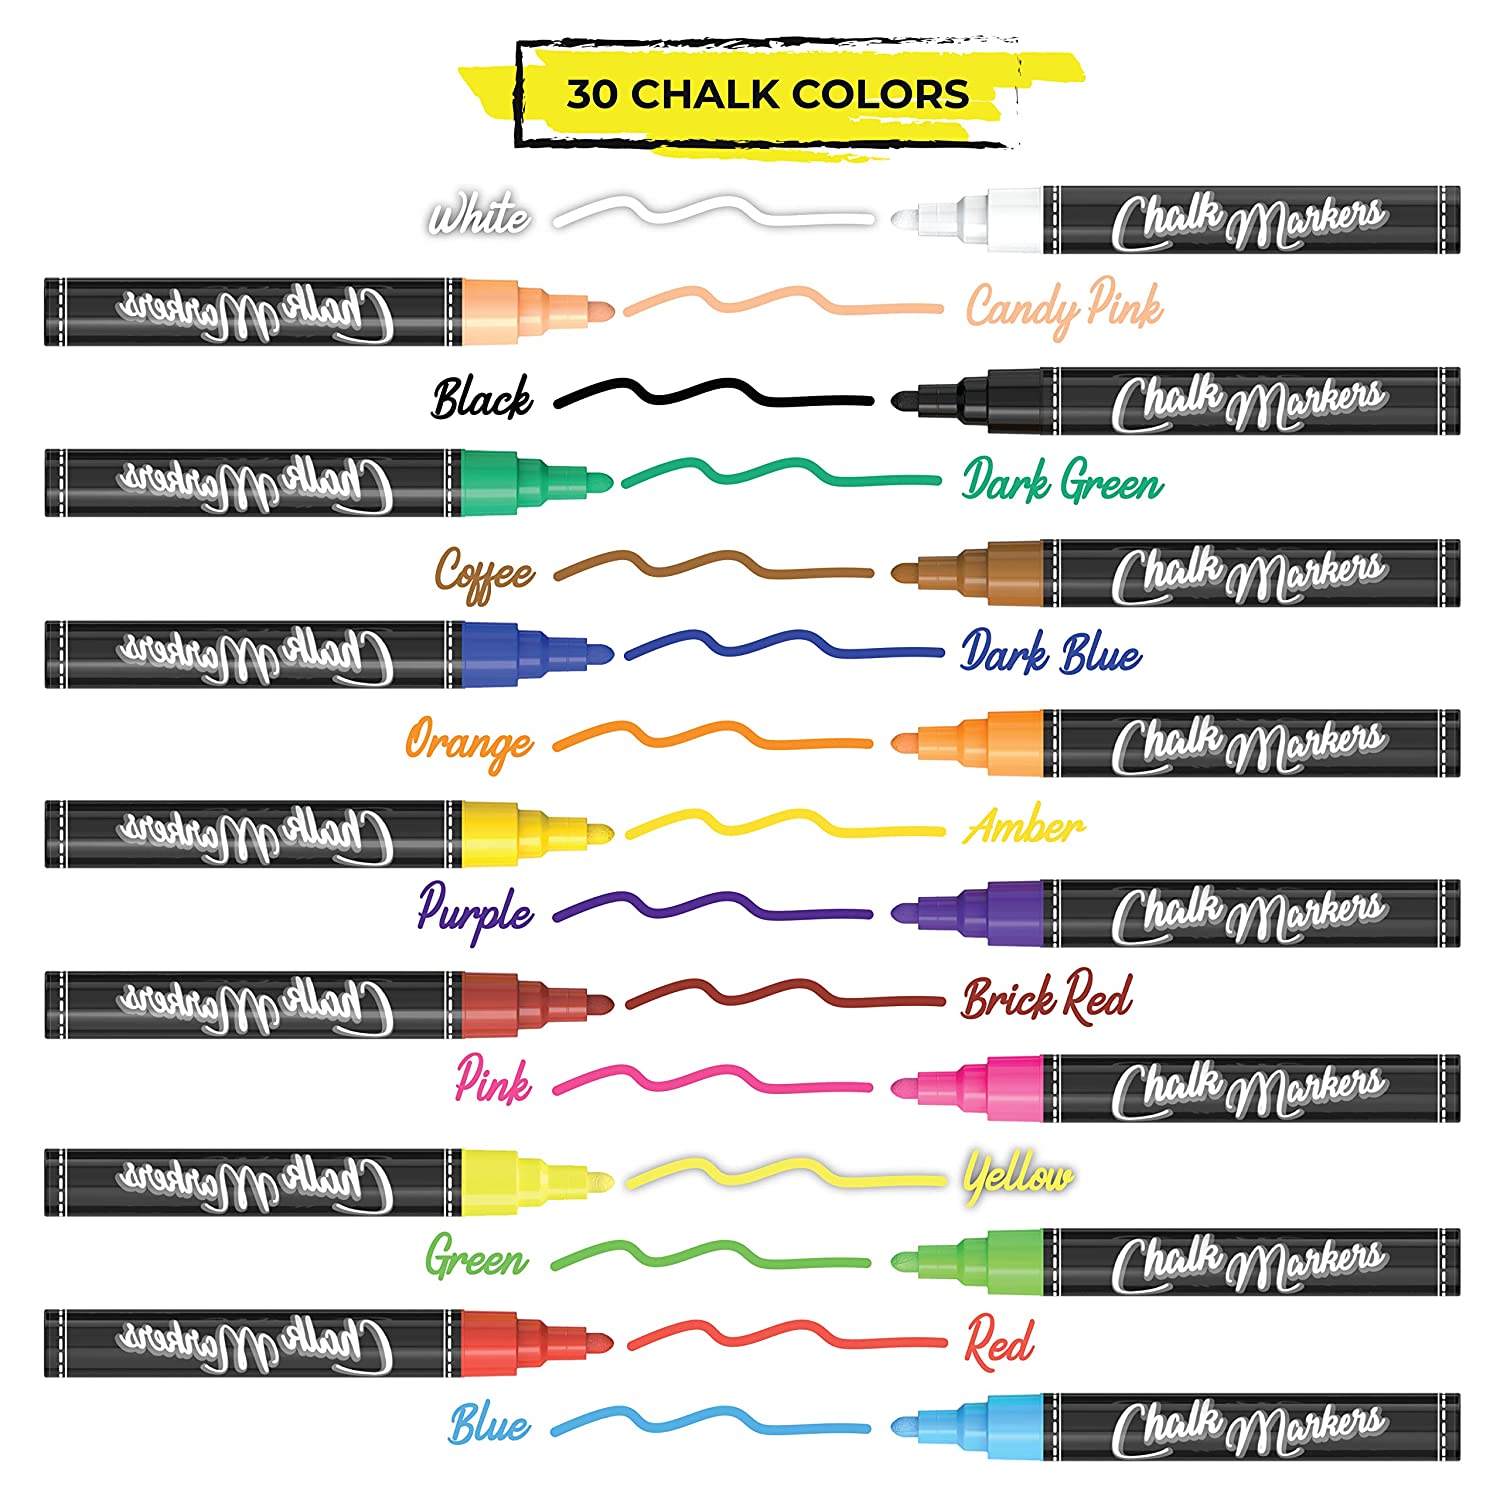 Chalkola Chalk Markers - Pack of 40 (Neon, Classic & Metallic) Chalk Pens - for